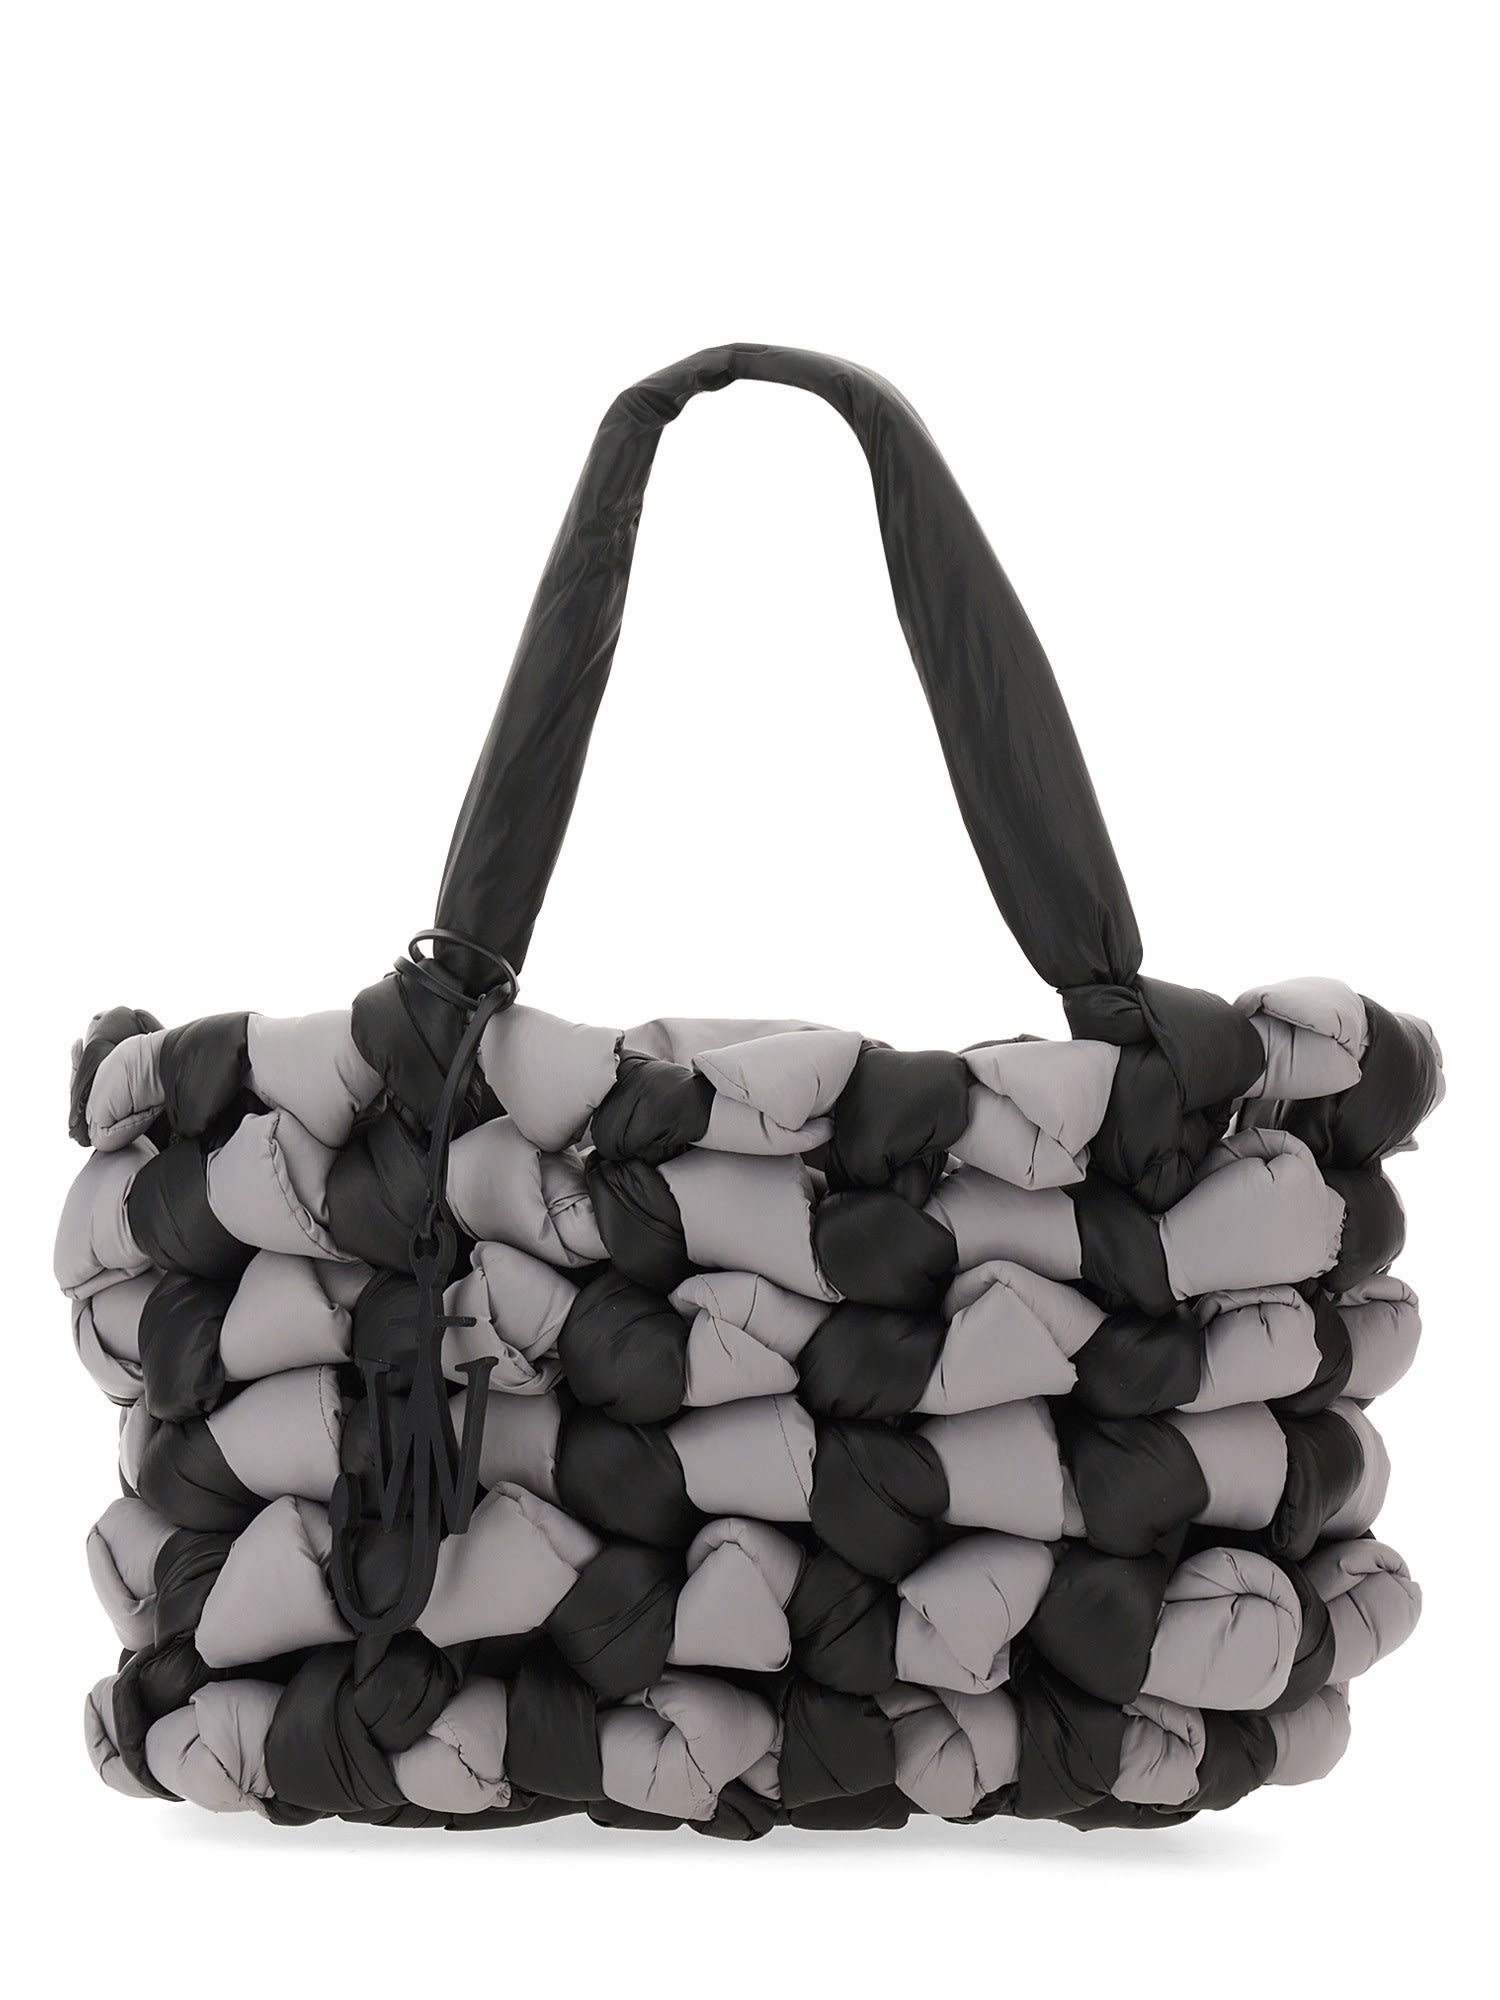 JW ANDERSON LARGE WOVEN TOTE BAG